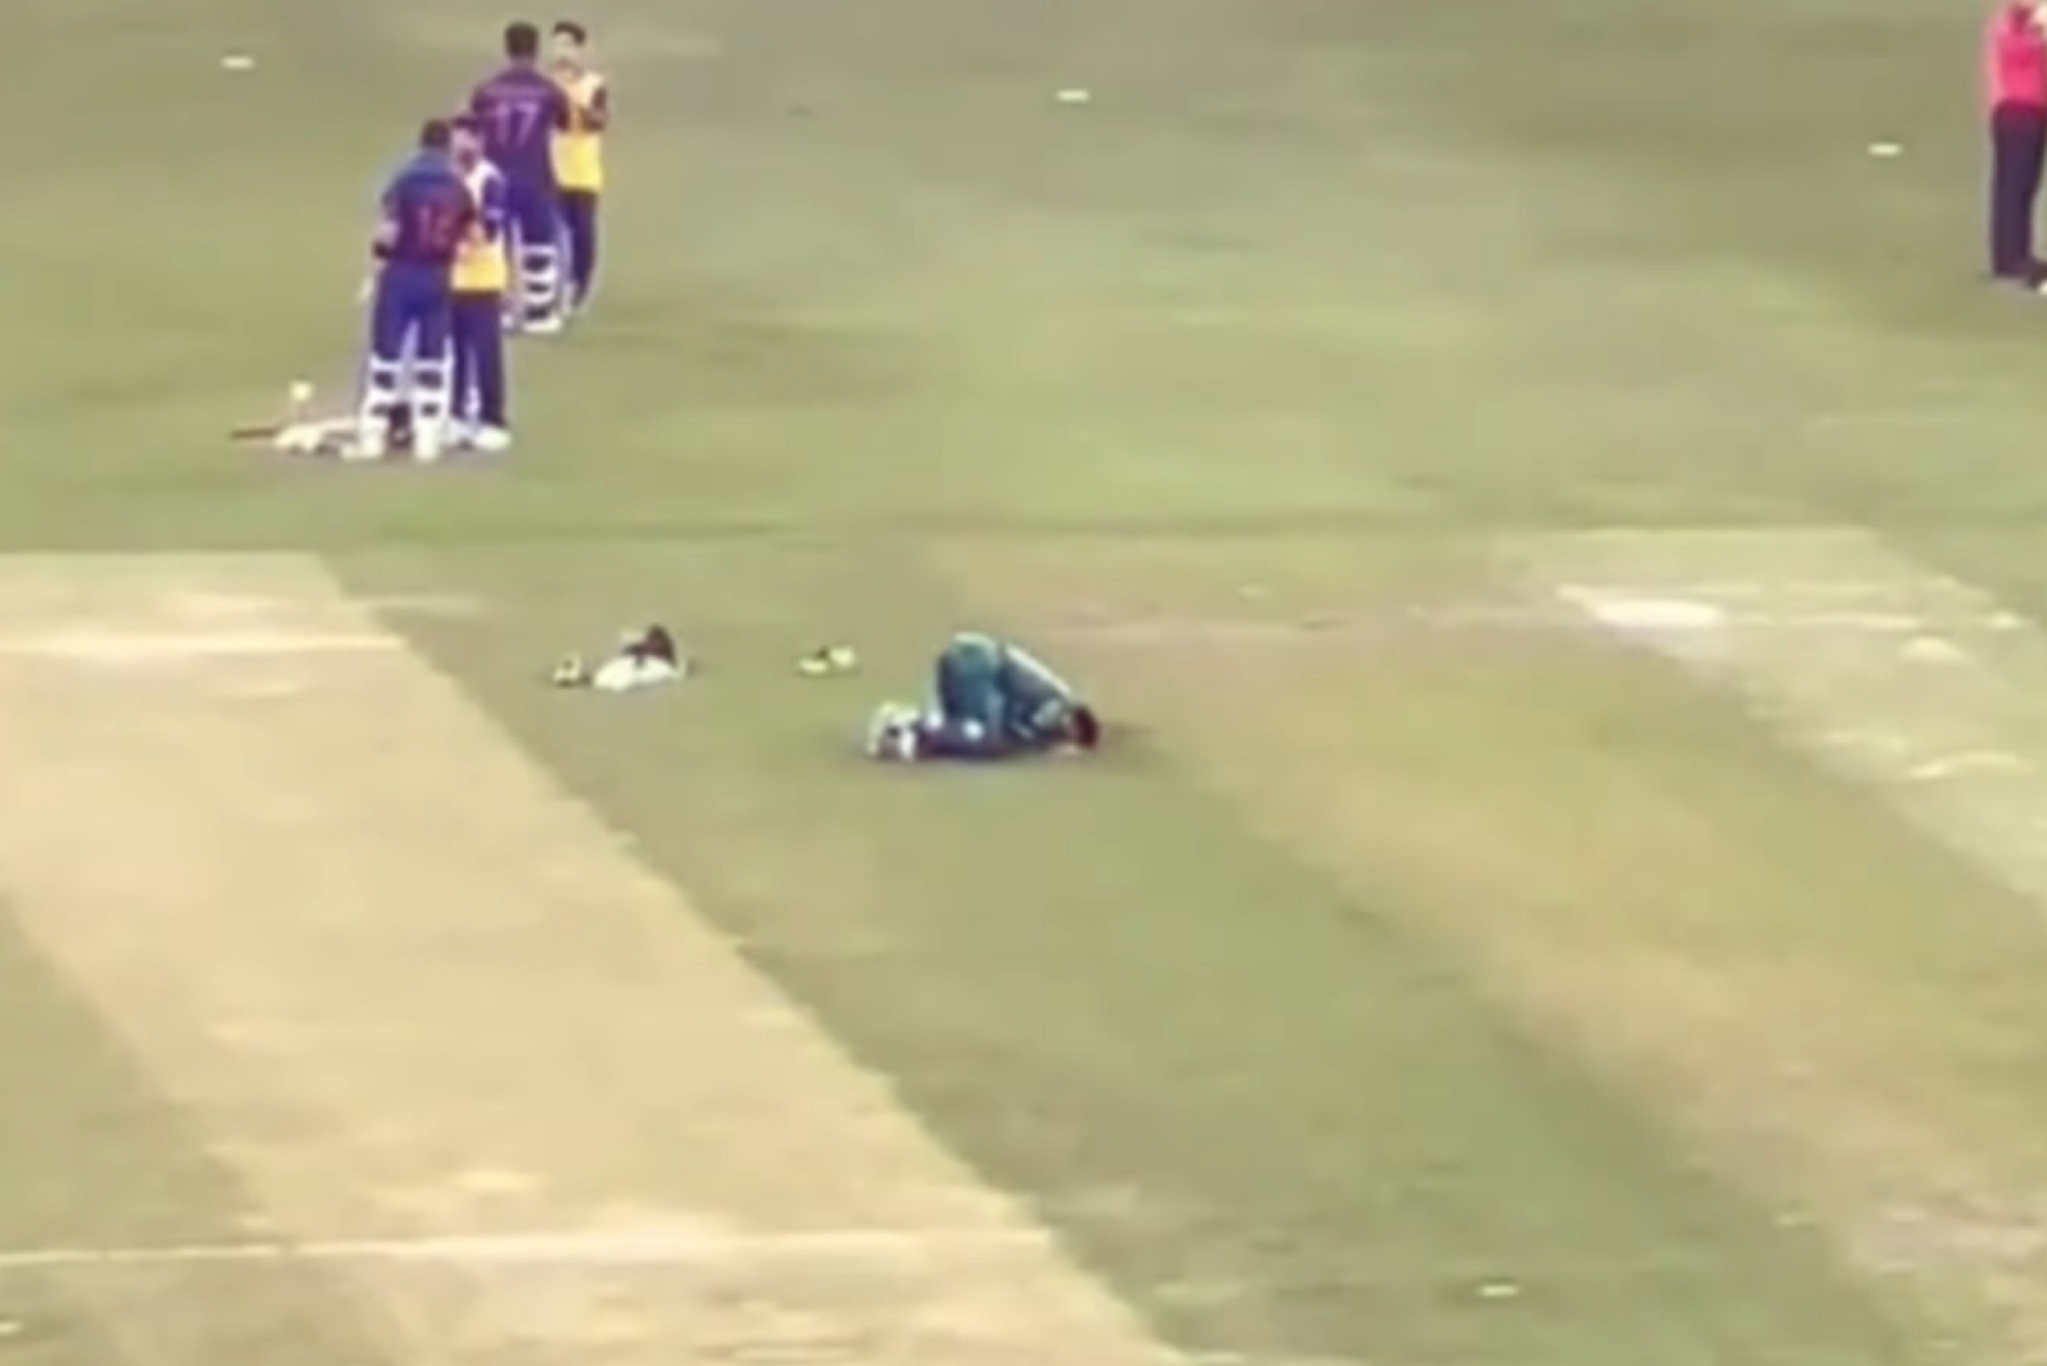 The Pakistani player doing namaz during the cricket match.